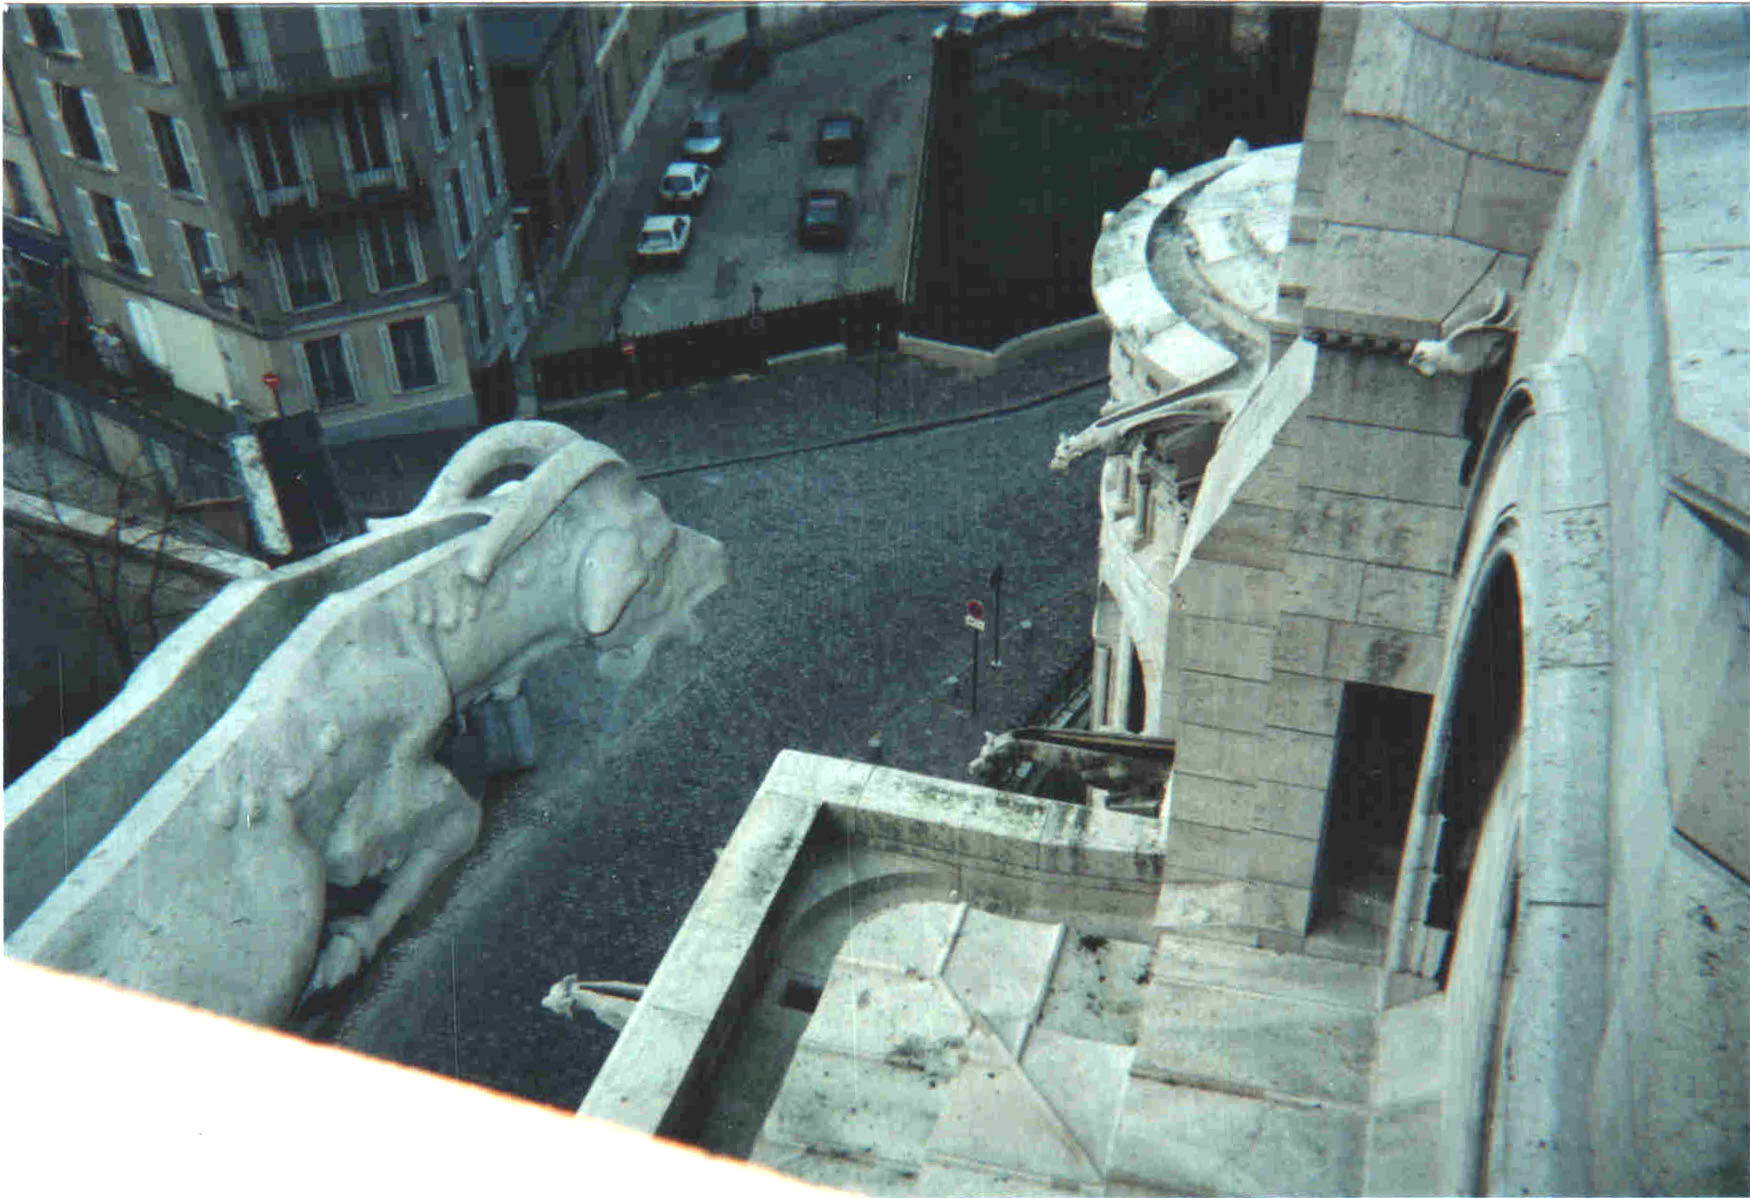 Looking stright down from Sacre Coeur